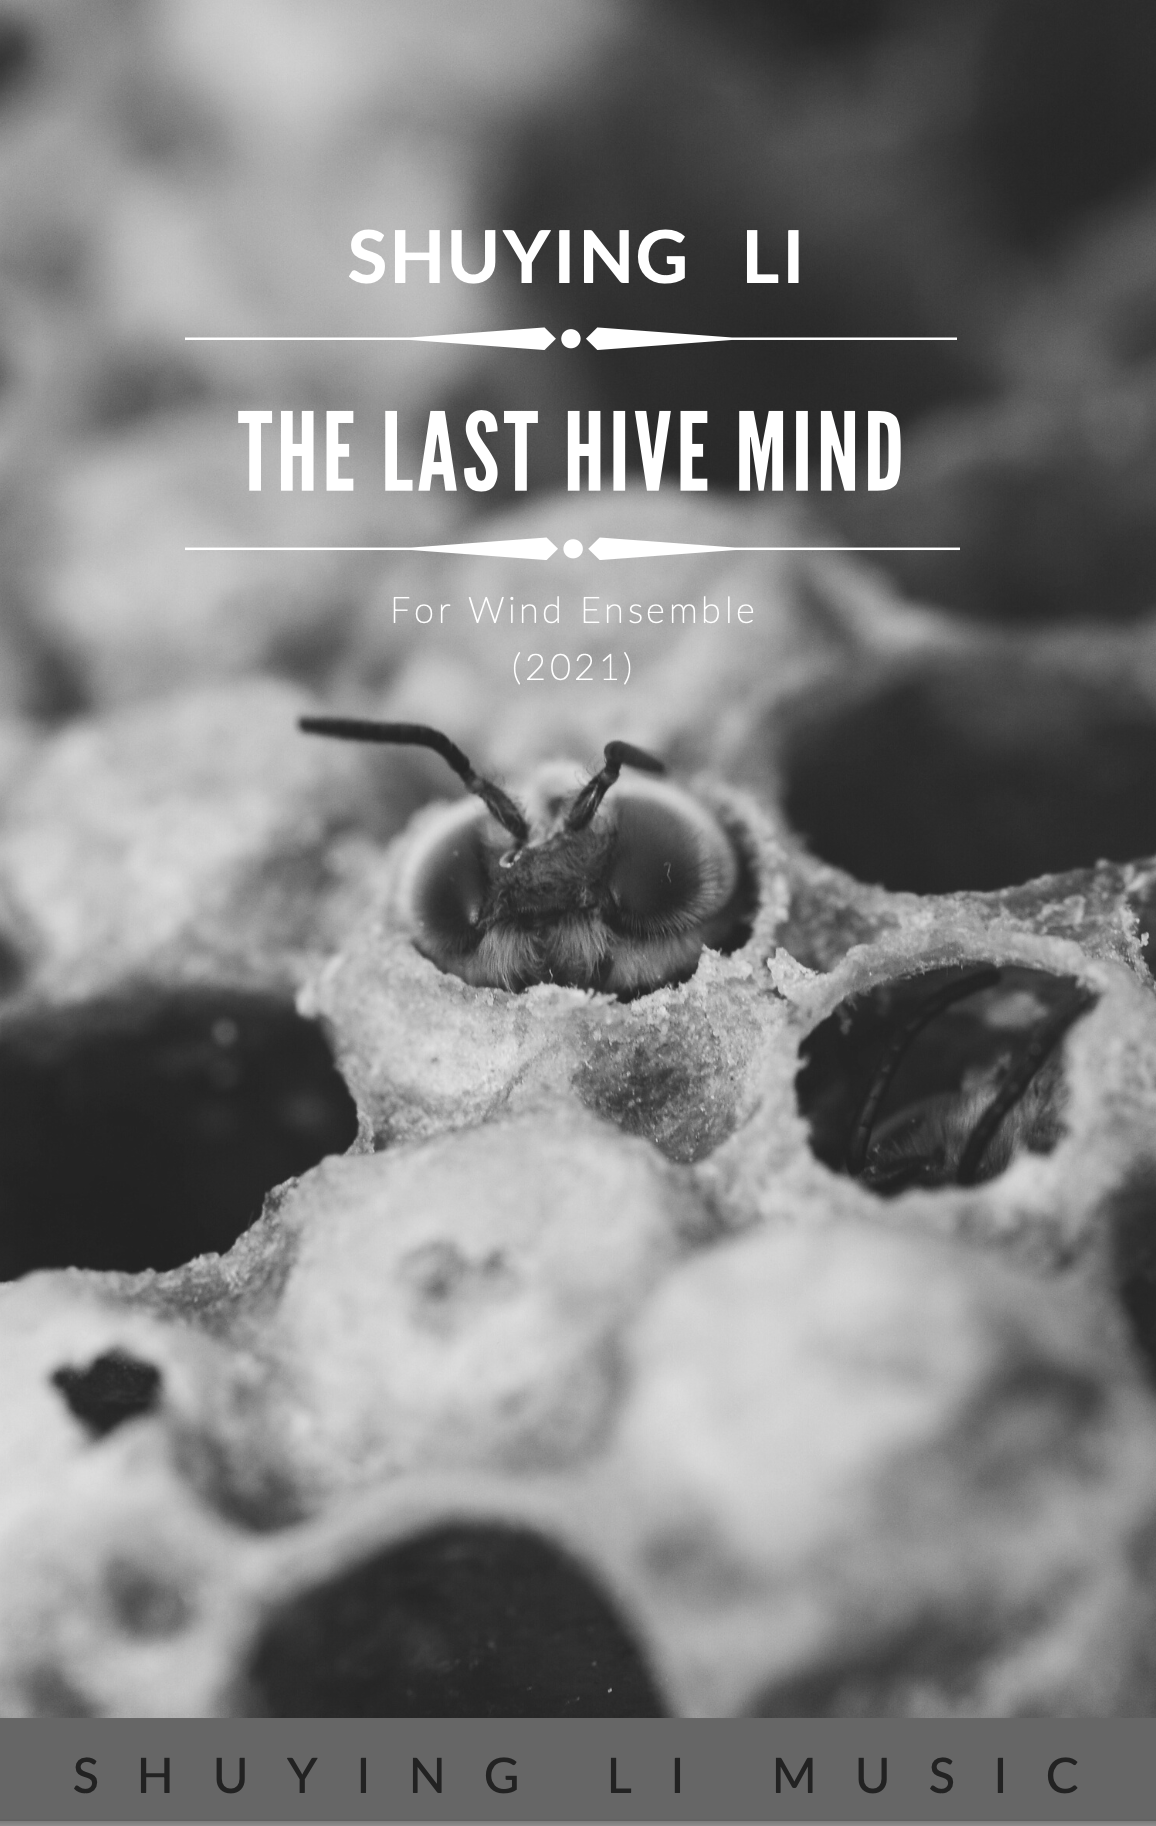 The Last Hivemind (2021, Grade 4 Version) by Shuying Li